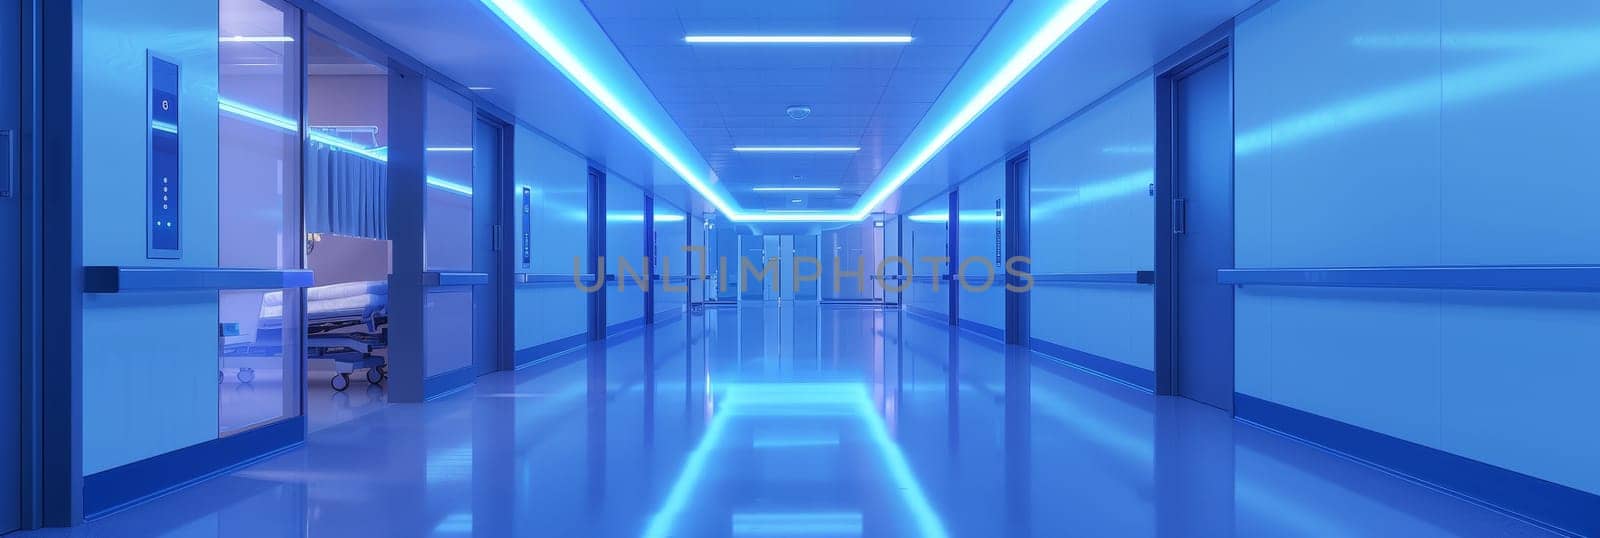 A long hallway with blue lights and white walls by AI generated image.